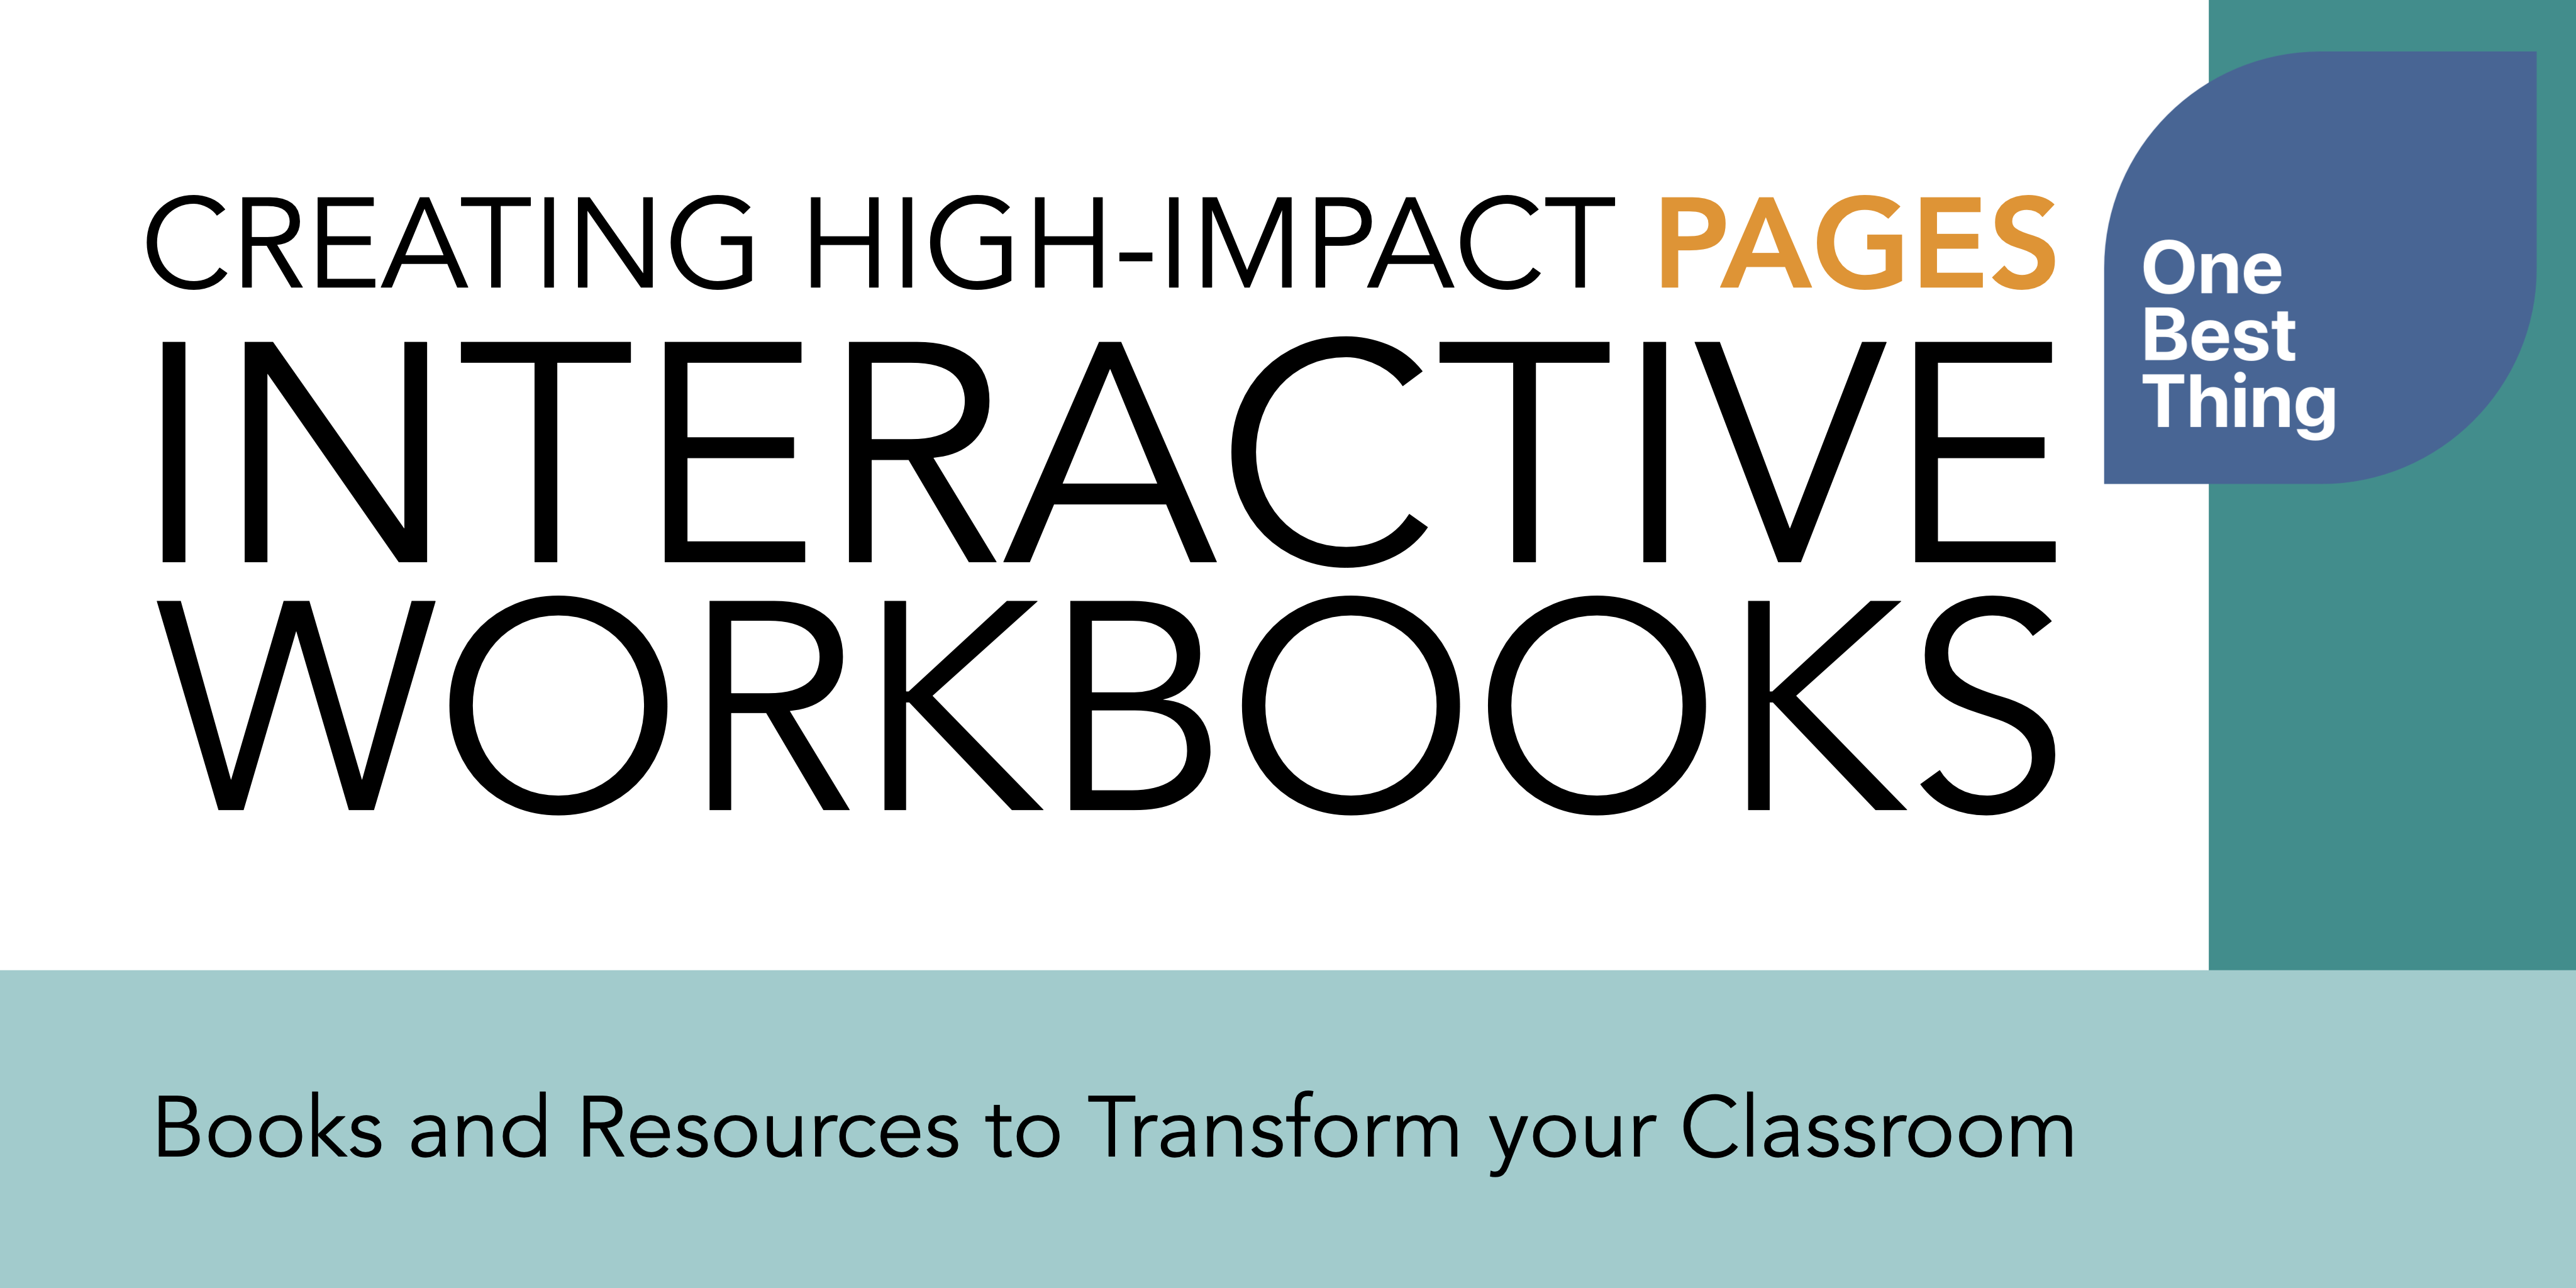 "Creating High-Impact Pages Interactive Workbooks" with a leaf shaped "One Best Thing" logo